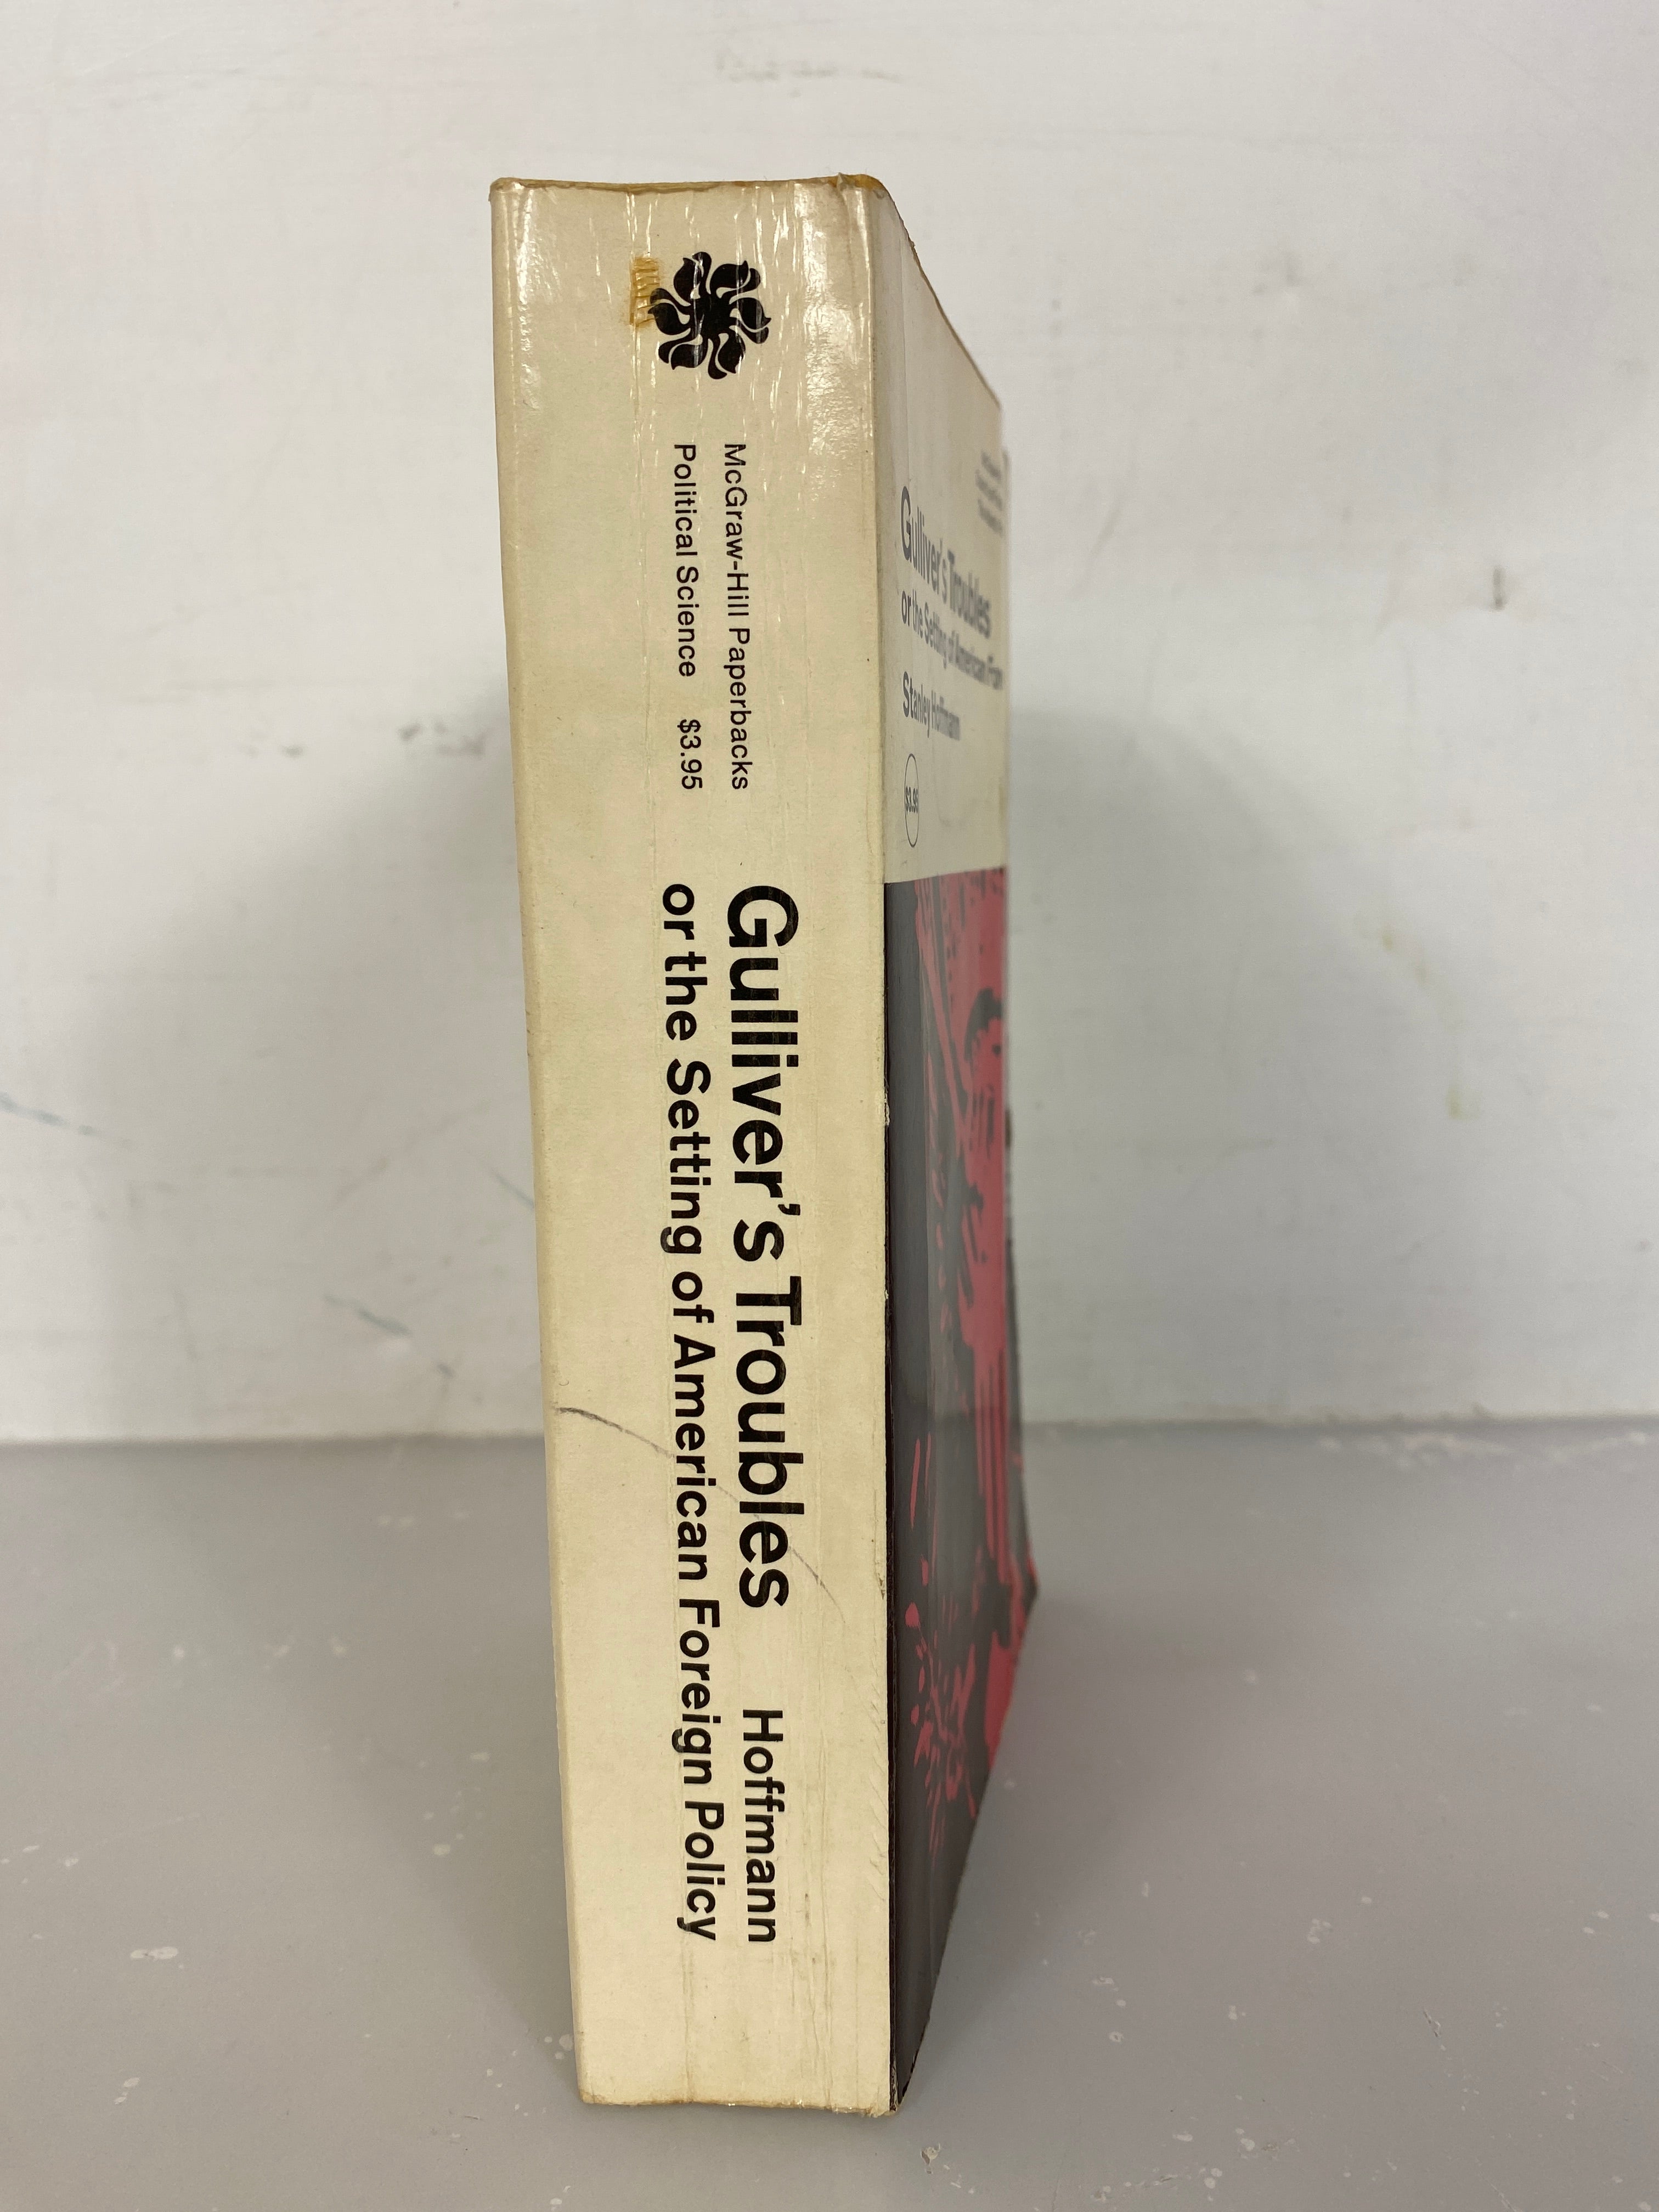 Gulliver's Troubles or the Setting of American Foreign Policy by Stanley Hoffman 1968 SC